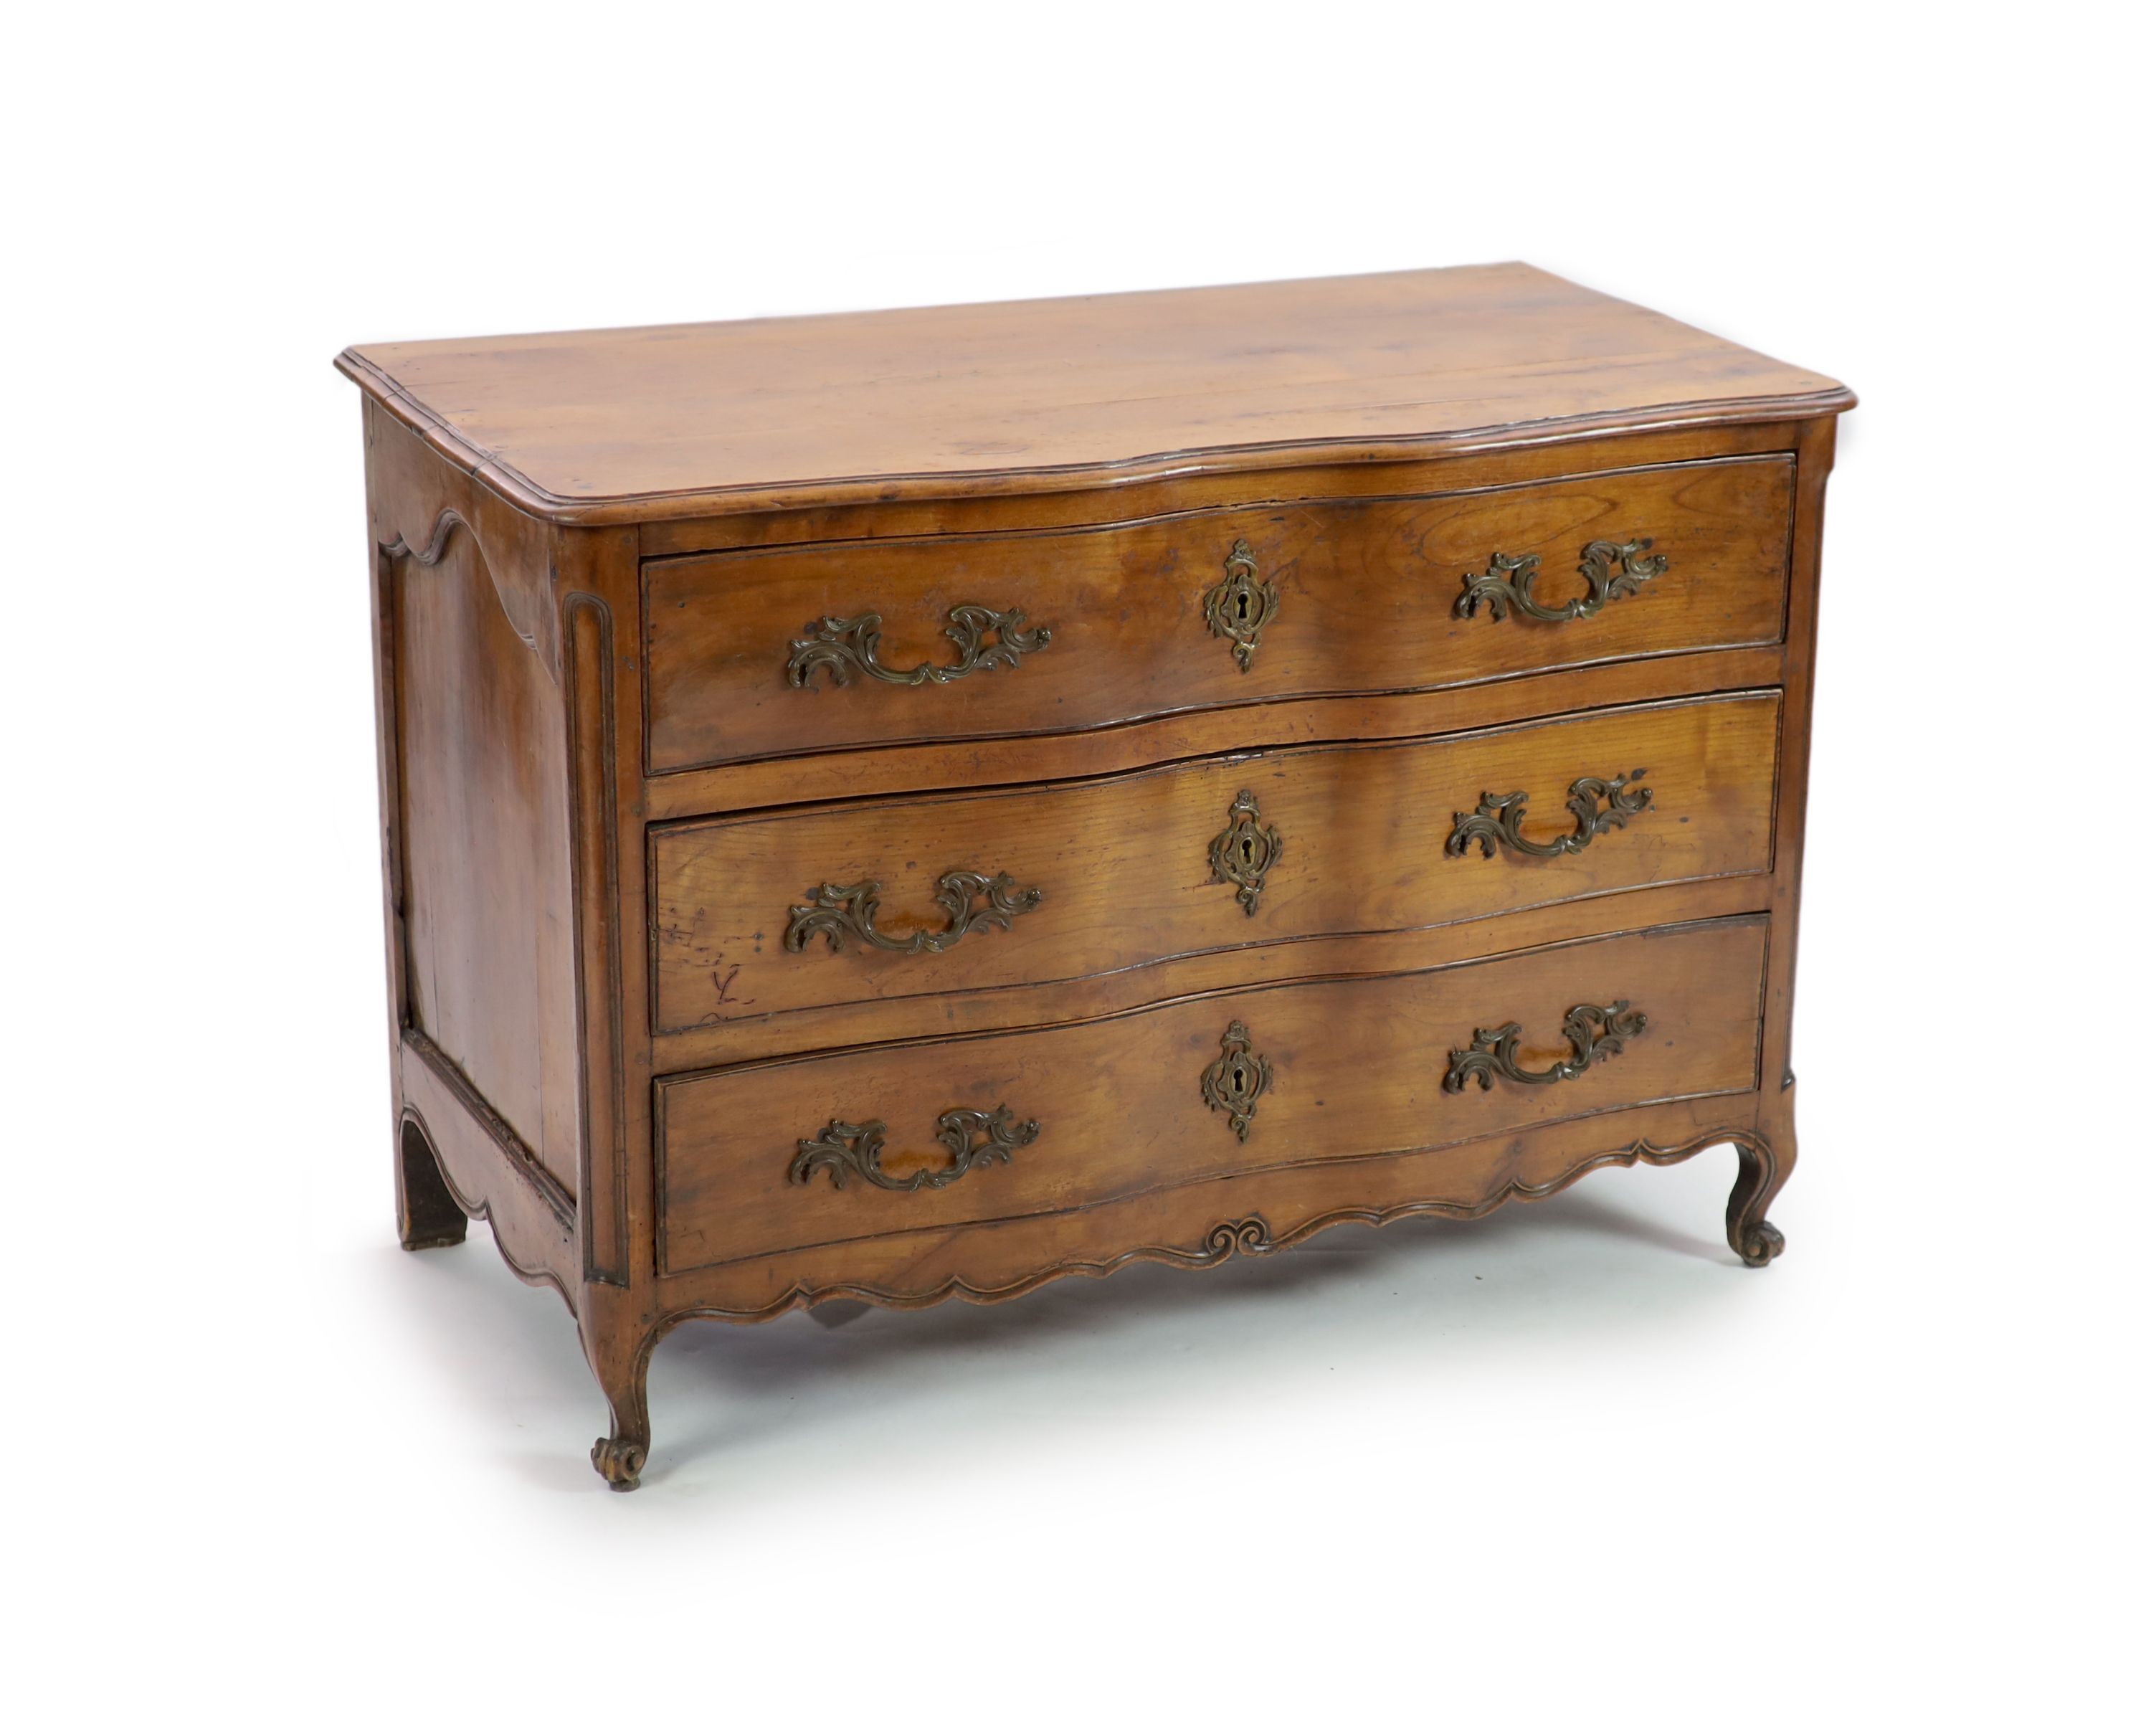 A Louis XV chestnut serpentine chest of three drawers, dated 1776,fitted three long drawers on